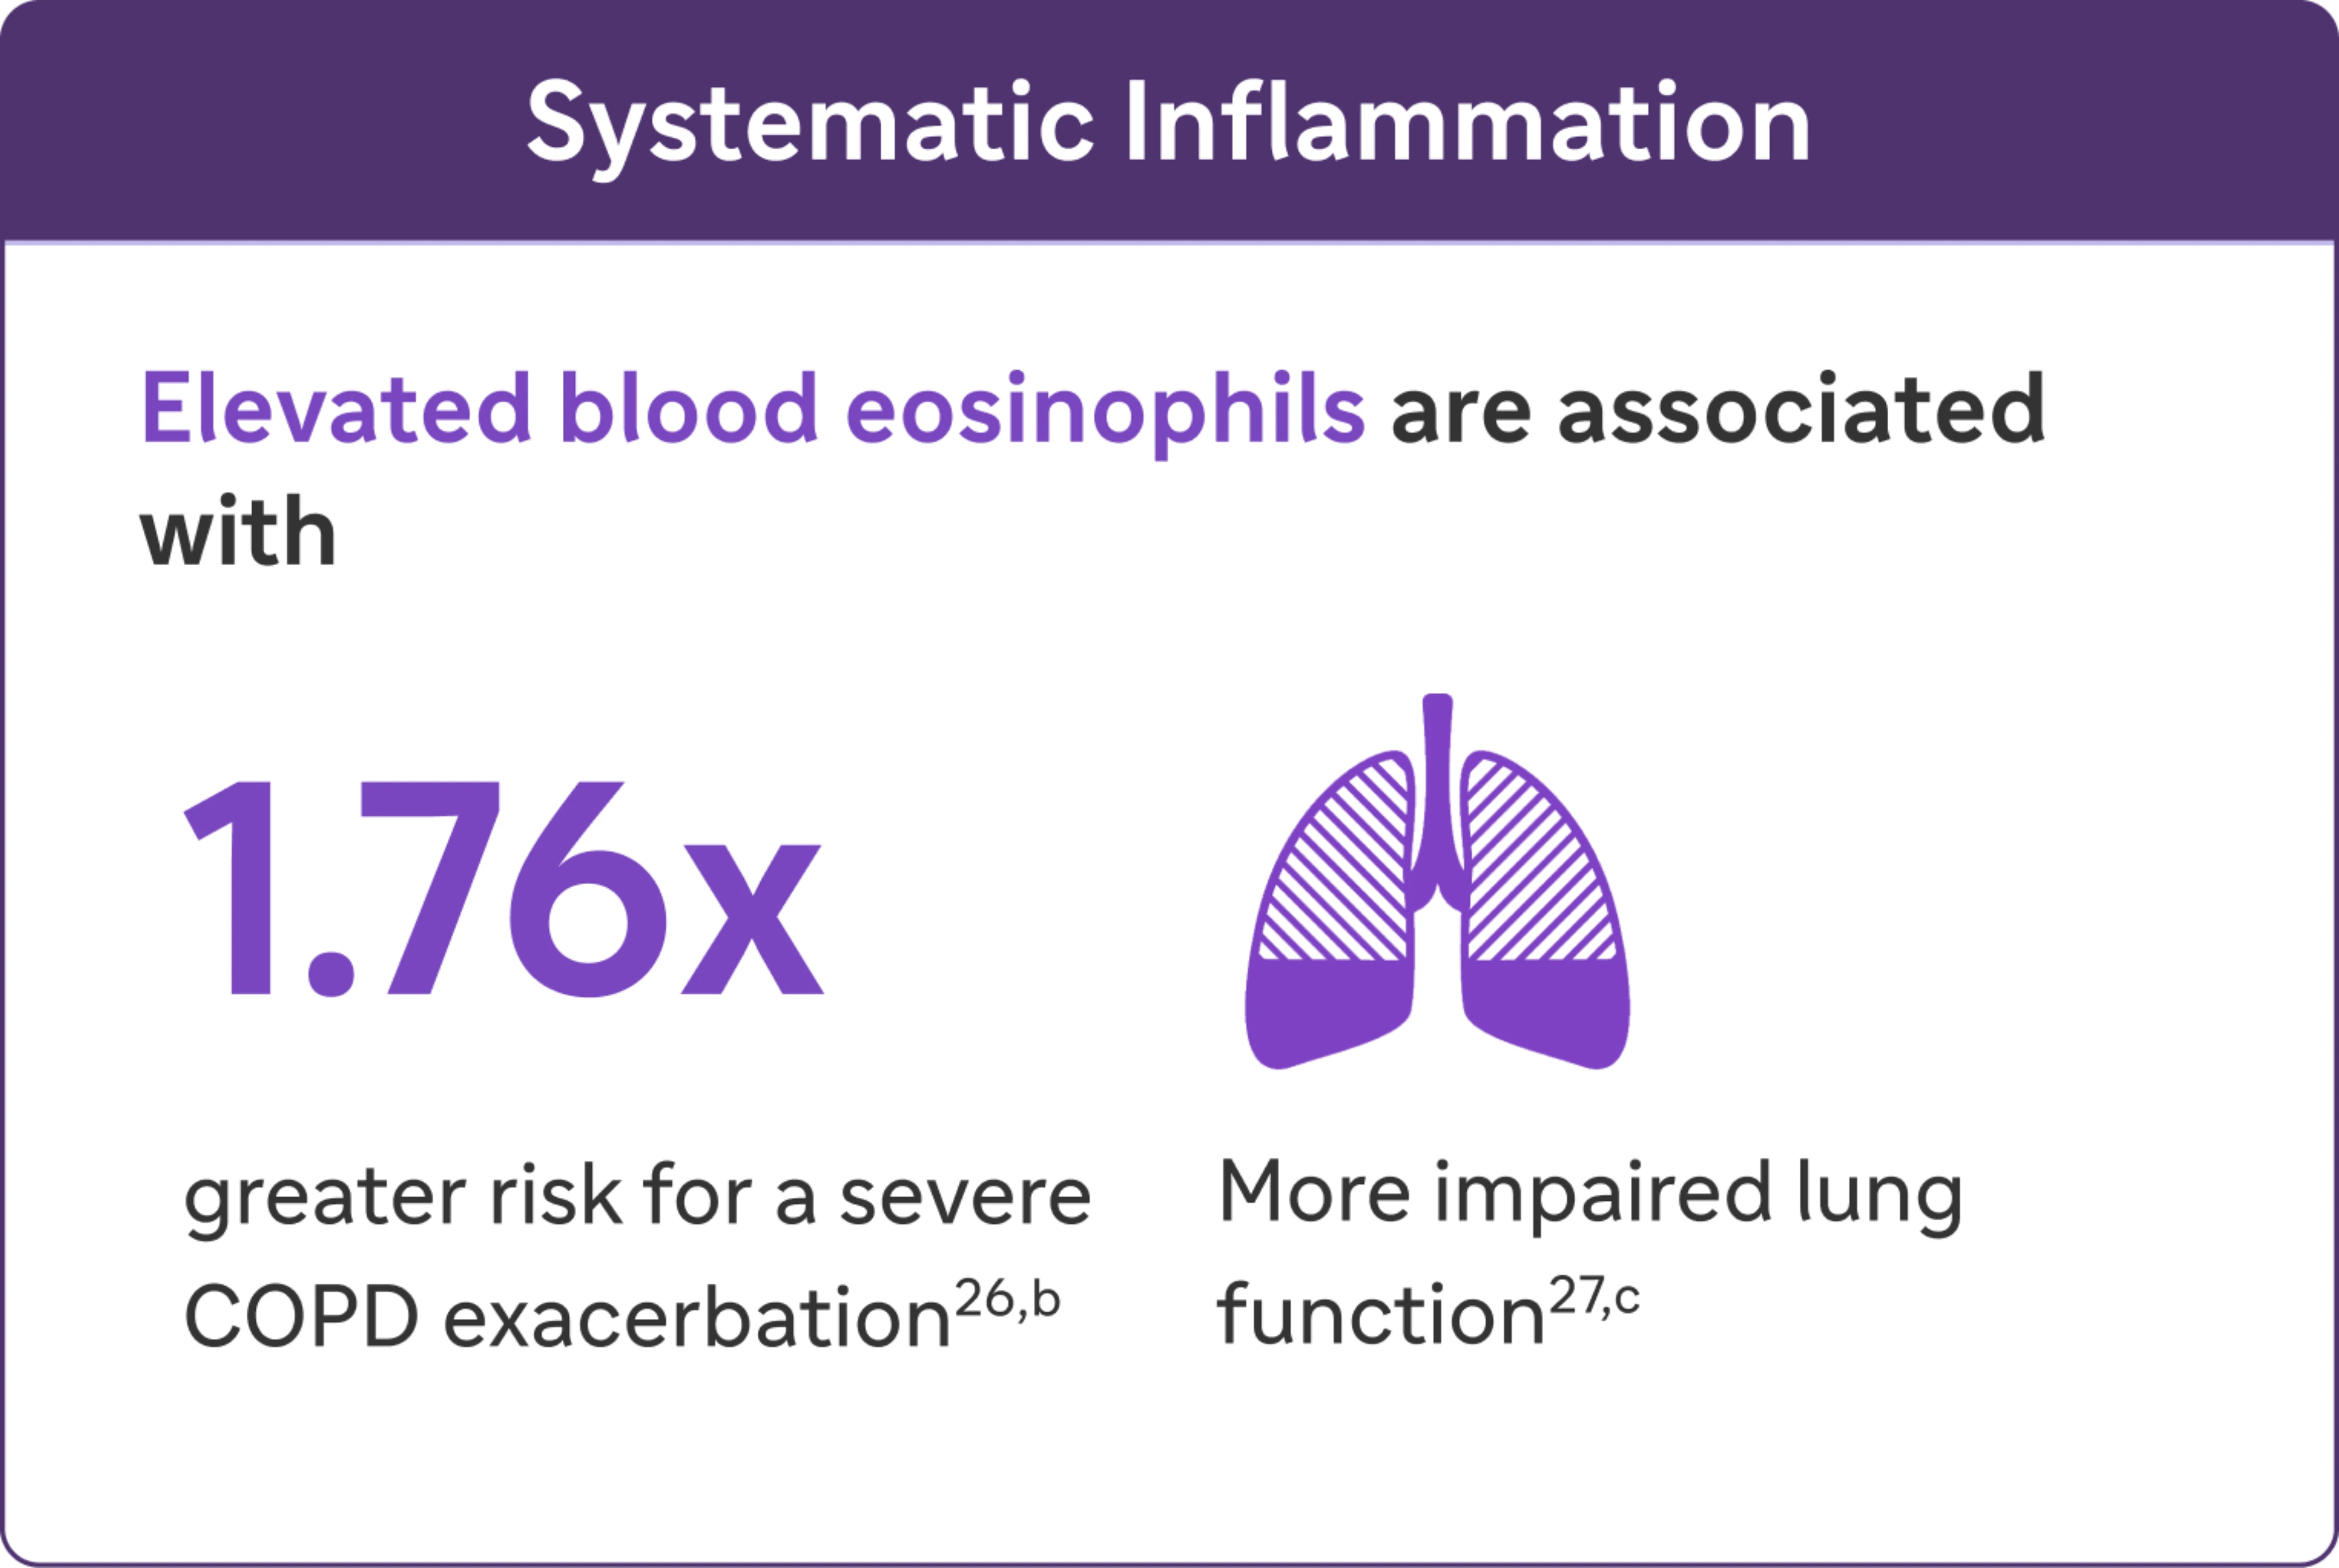 Elevated blood eosinophils are associated with 1.76x greater risk for a severe COPD exacerbation